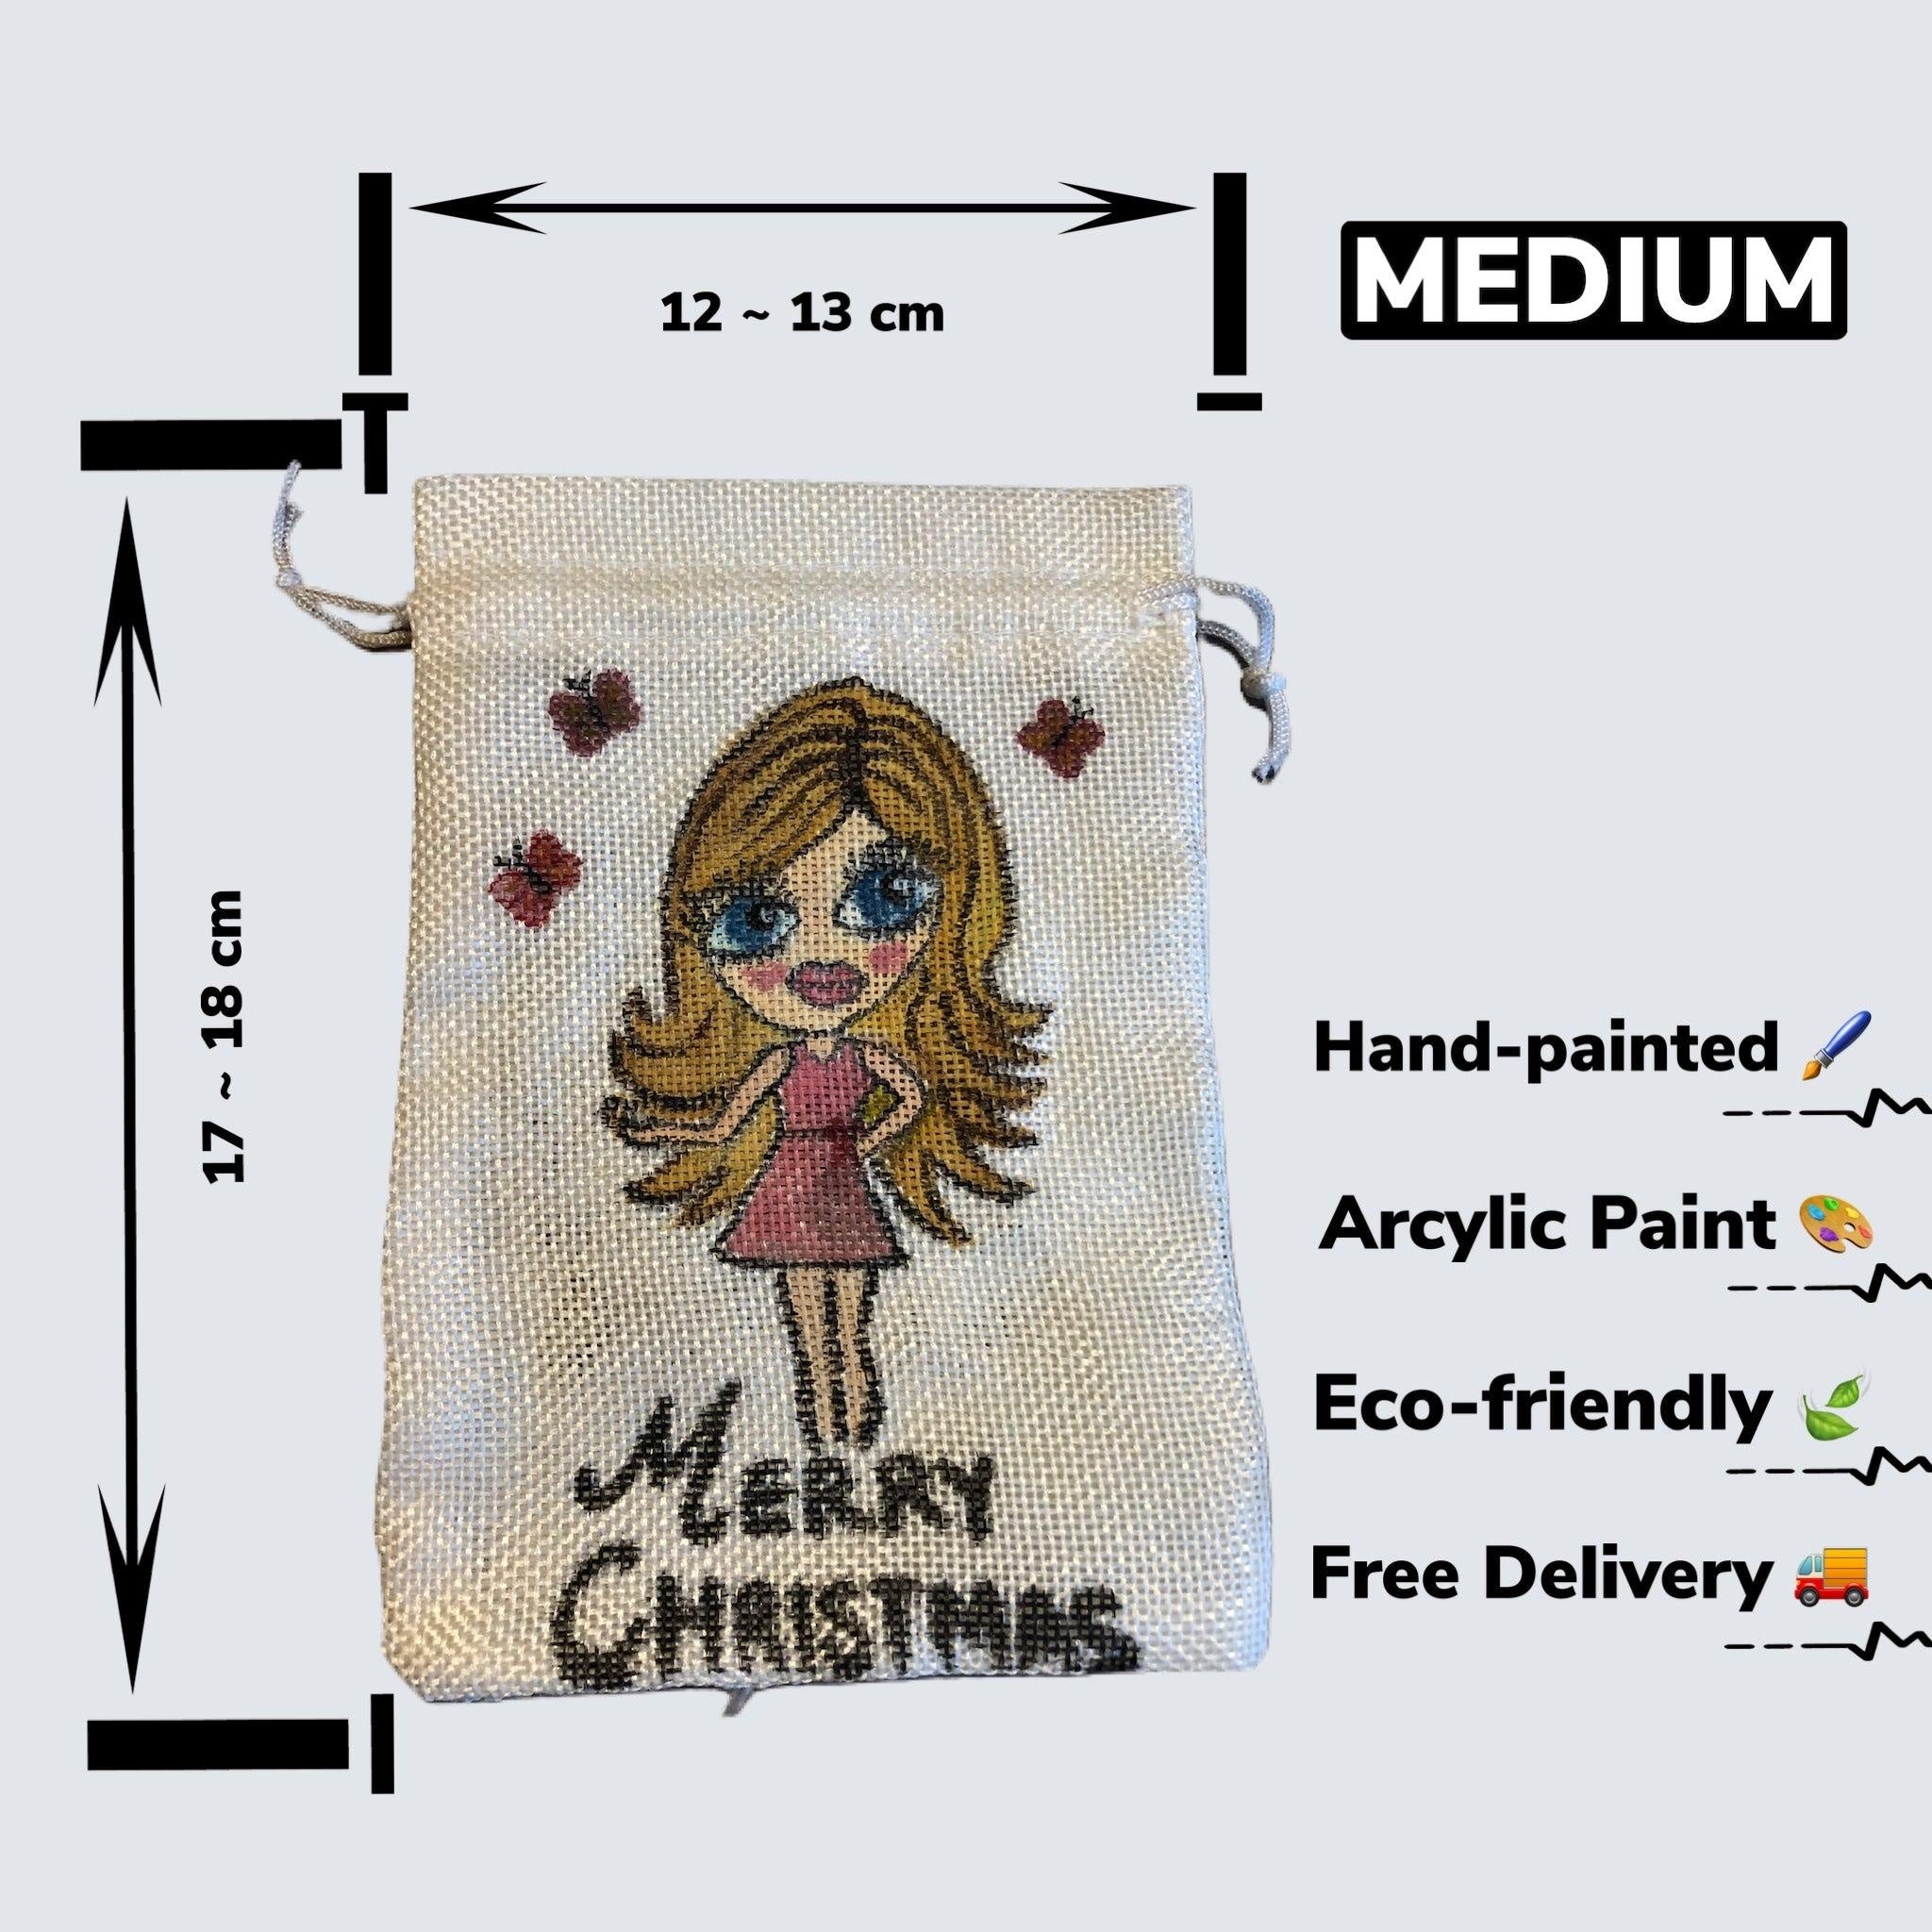 Hand-painted Christmas Gift Pouch - Medium 13x18 cm Cotton Linen Bag with Drawstring